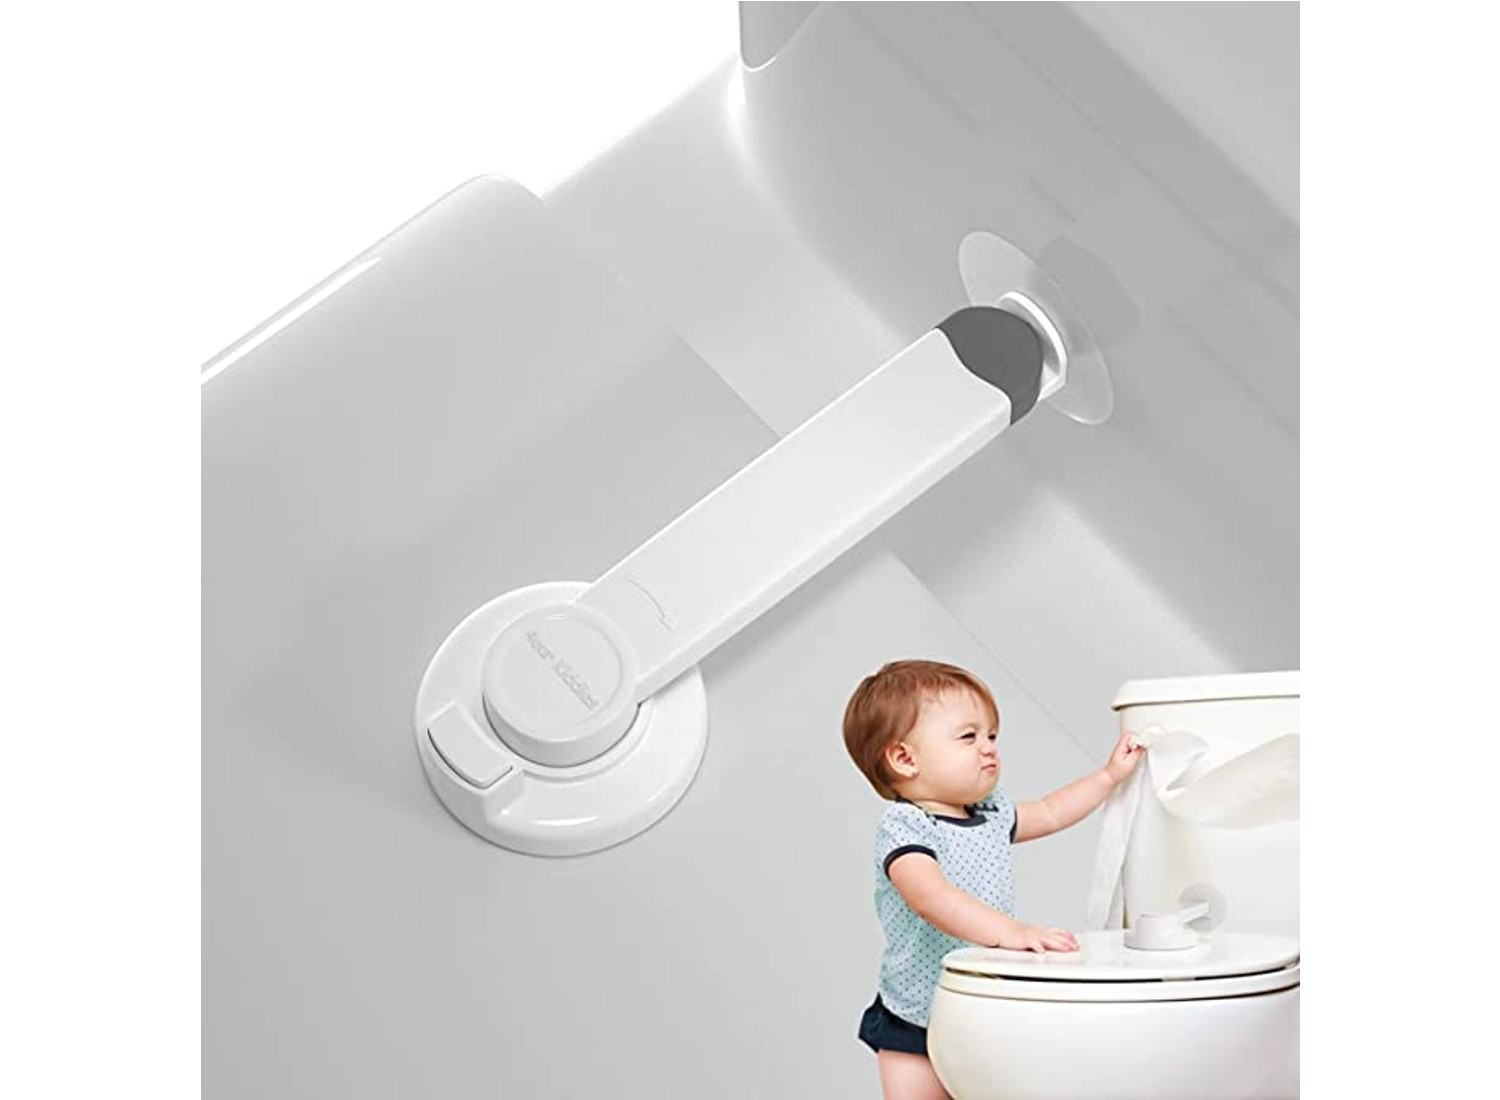 Toilet Seat Locks ,Toilet Locks for Children Fit for Most Toilet Lid,Upgraded Gapless Toilet Lock,has Strong 3M Adhesive and Easy Installation 1 Pack 